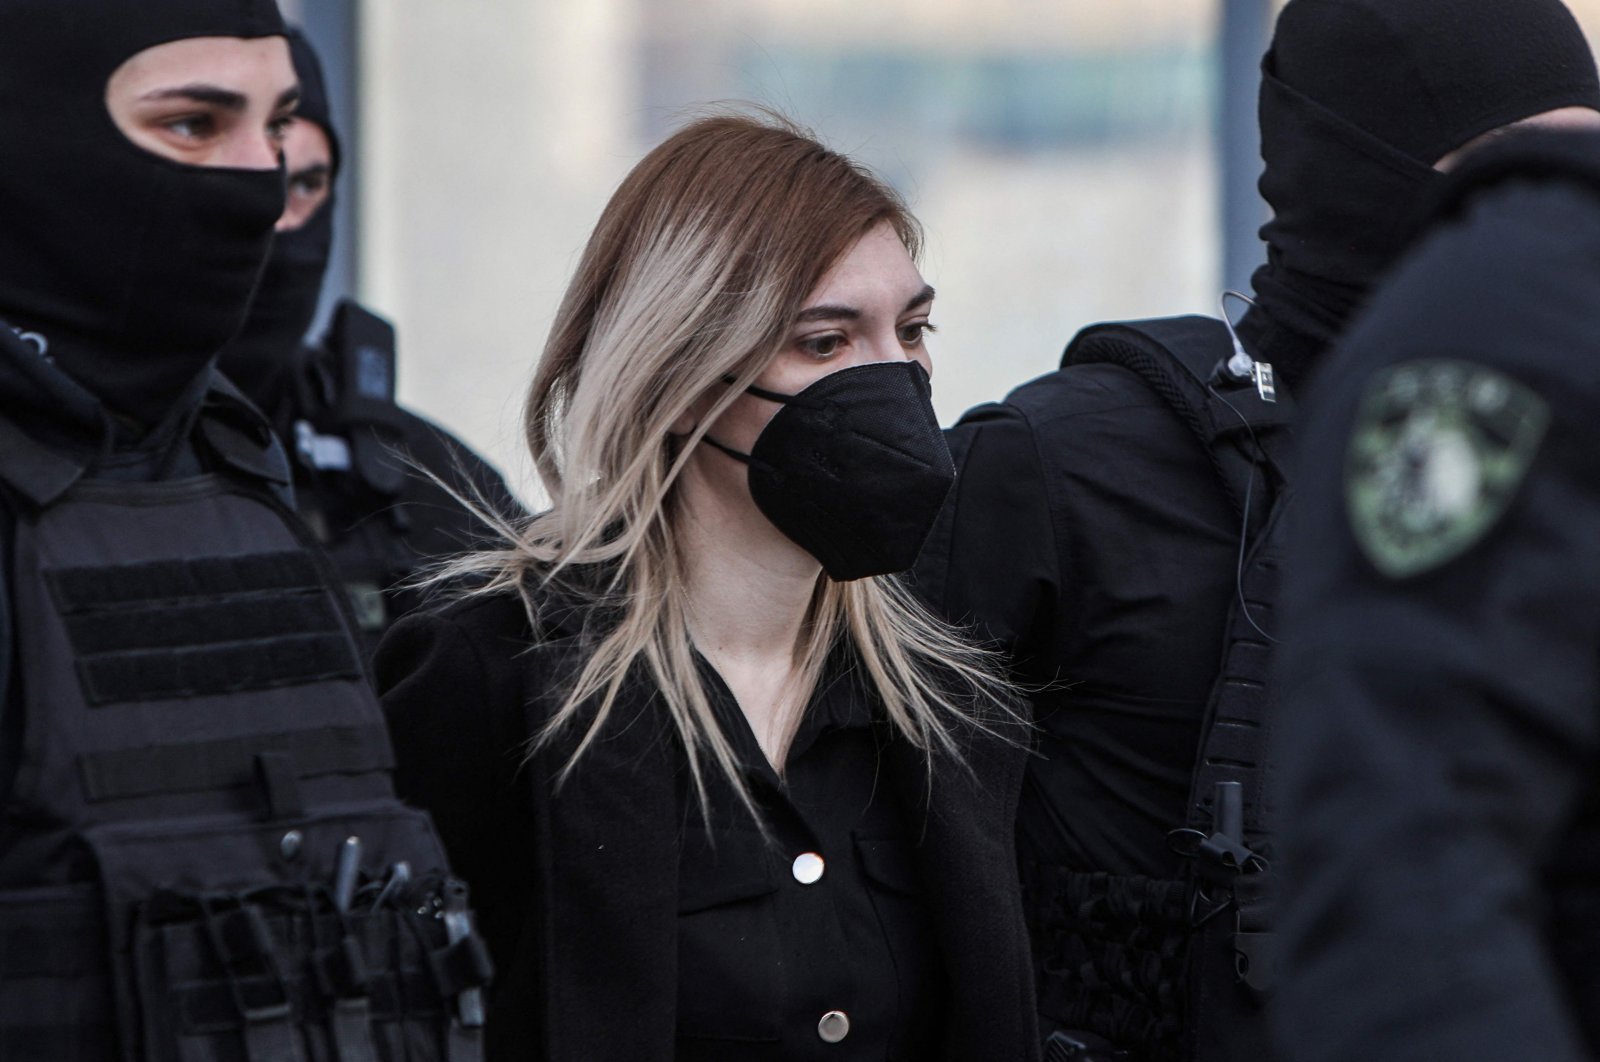 Roula Pispirigou (C), a 34-year-old mother accused of killing her three daughters, is escorted by police officers to Athens courthouse, Athens, Greece, Jan. 9, 2023. (AFP Photo)